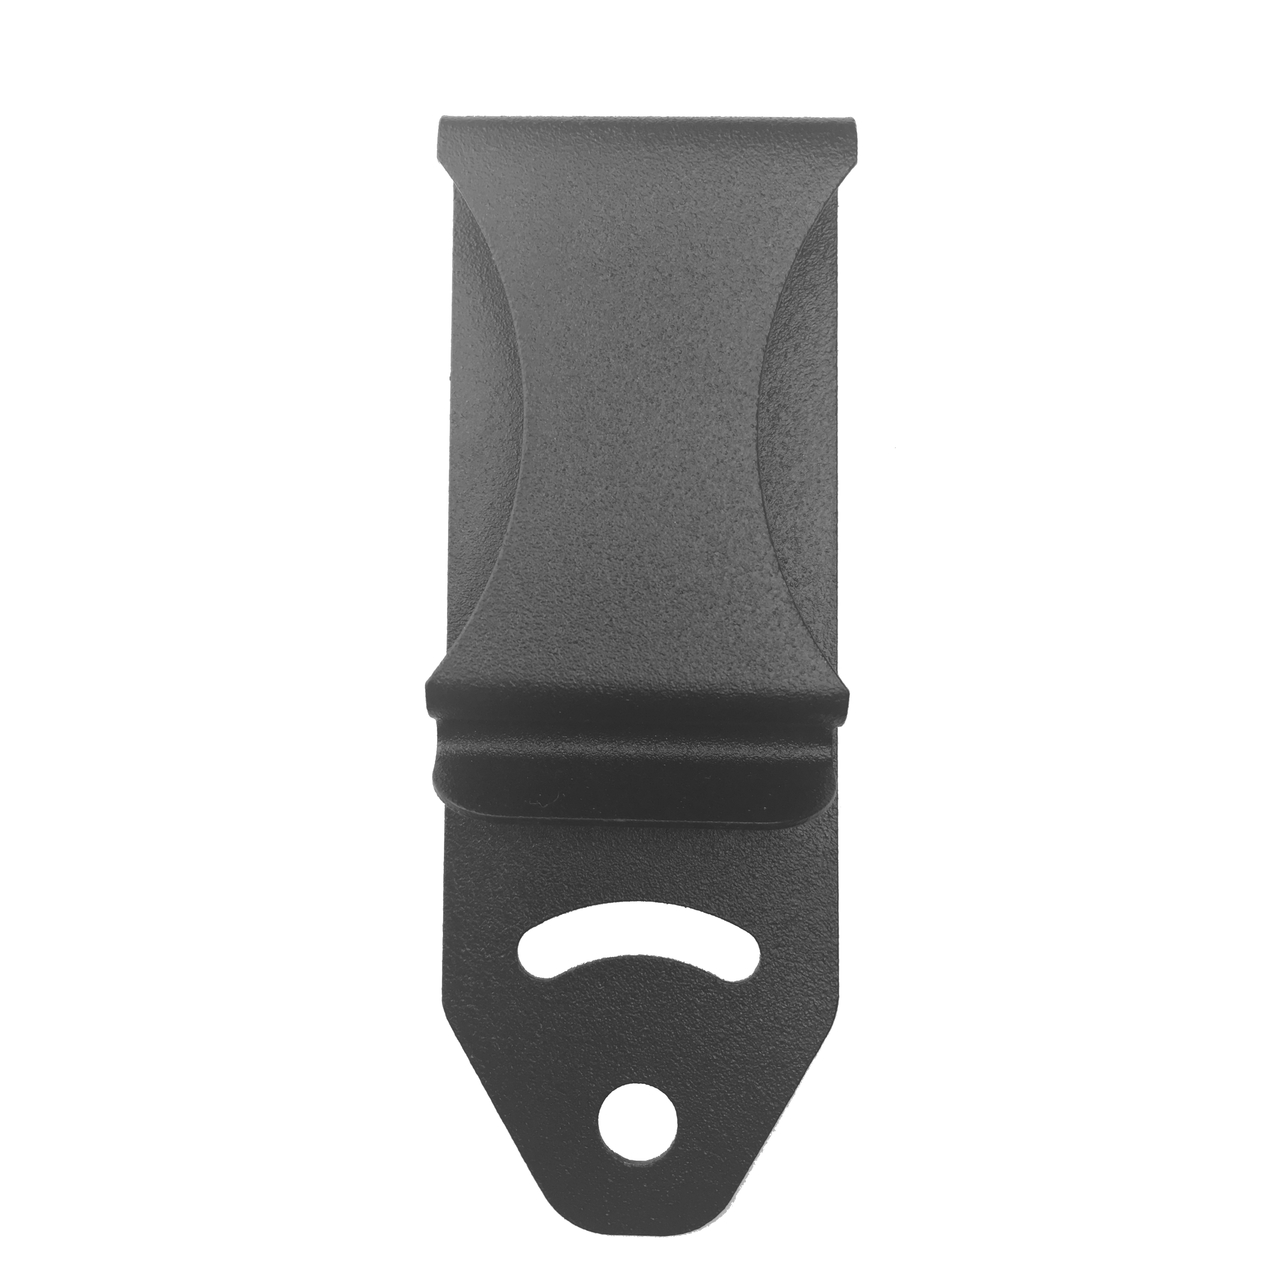 Replacement Metal Belt Clips Standard 1 3/4 Inches